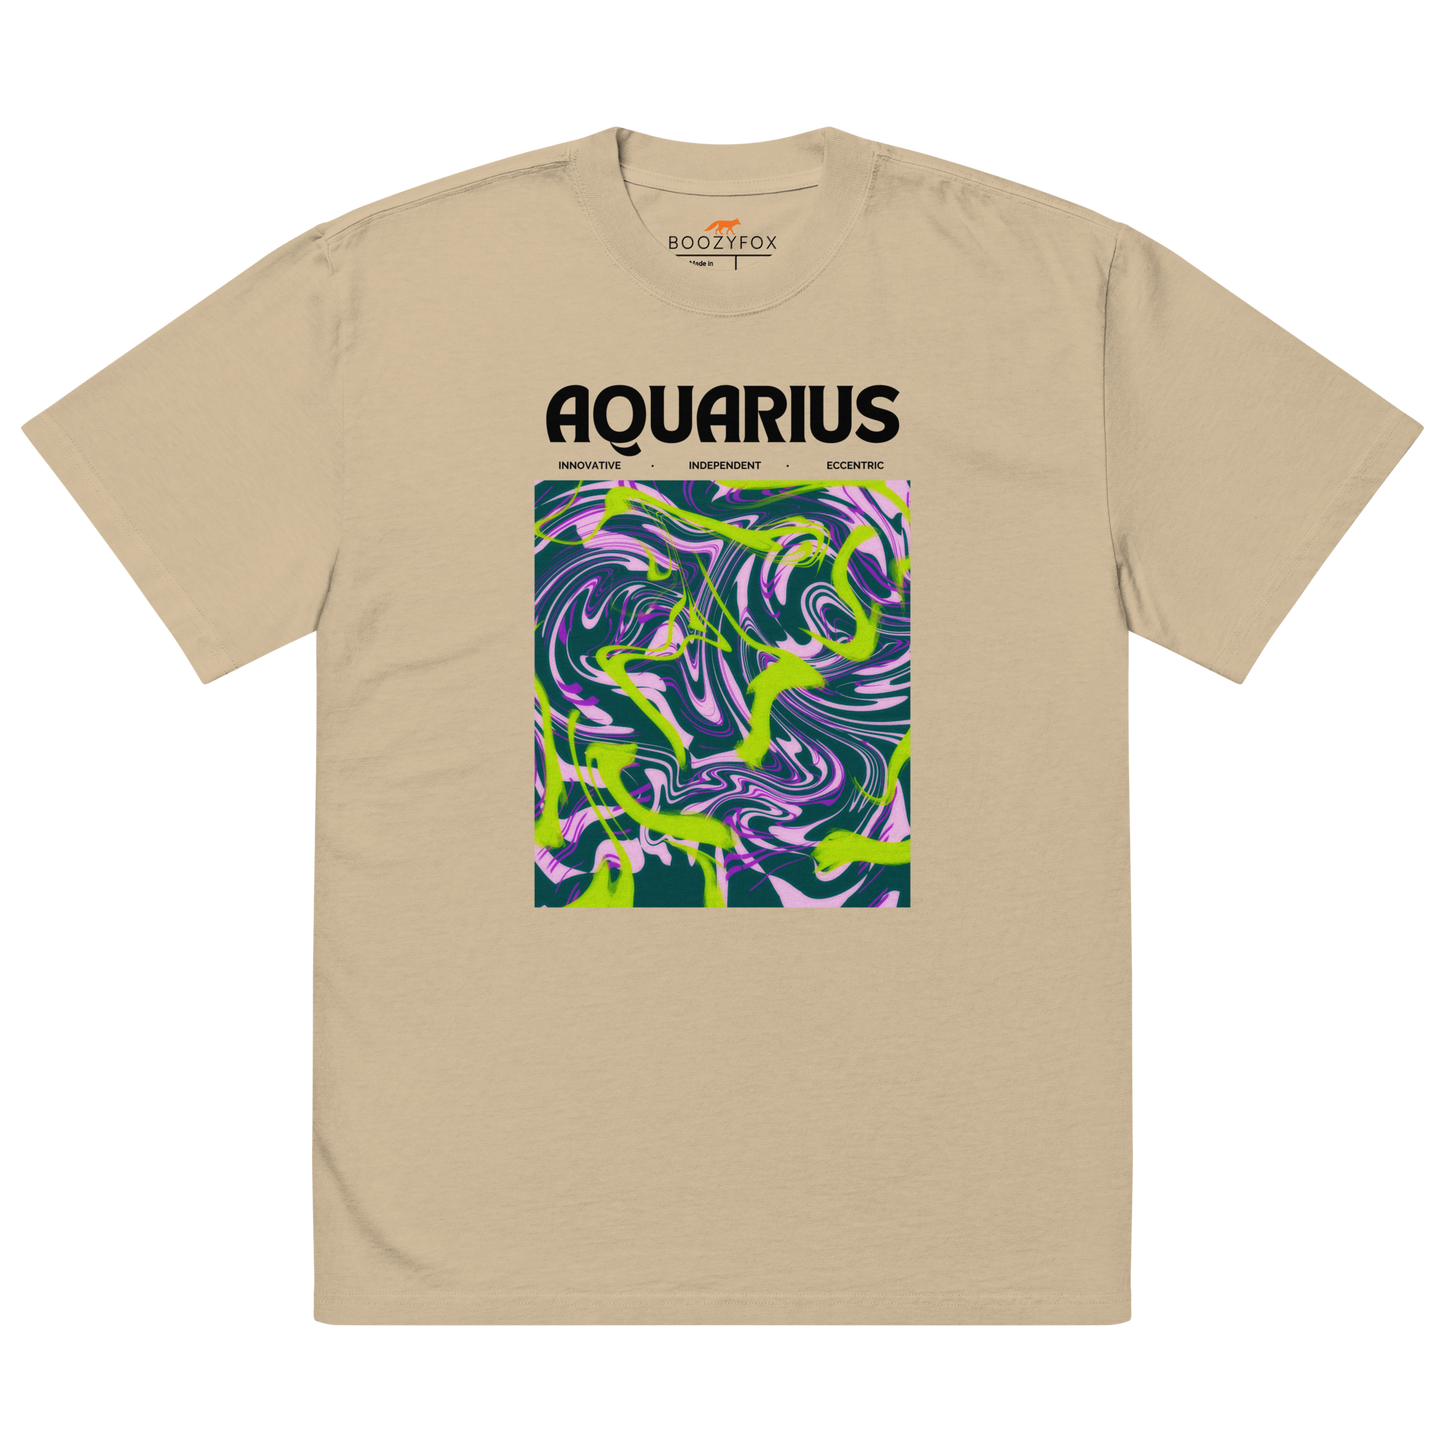 Faded Eucalyptus Aquarius Oversized T-Shirt featuring an Abstract Aquarius Star Sign graphic on the chest - Cool Graphic Zodiac Oversized Tees - Boozy Fox